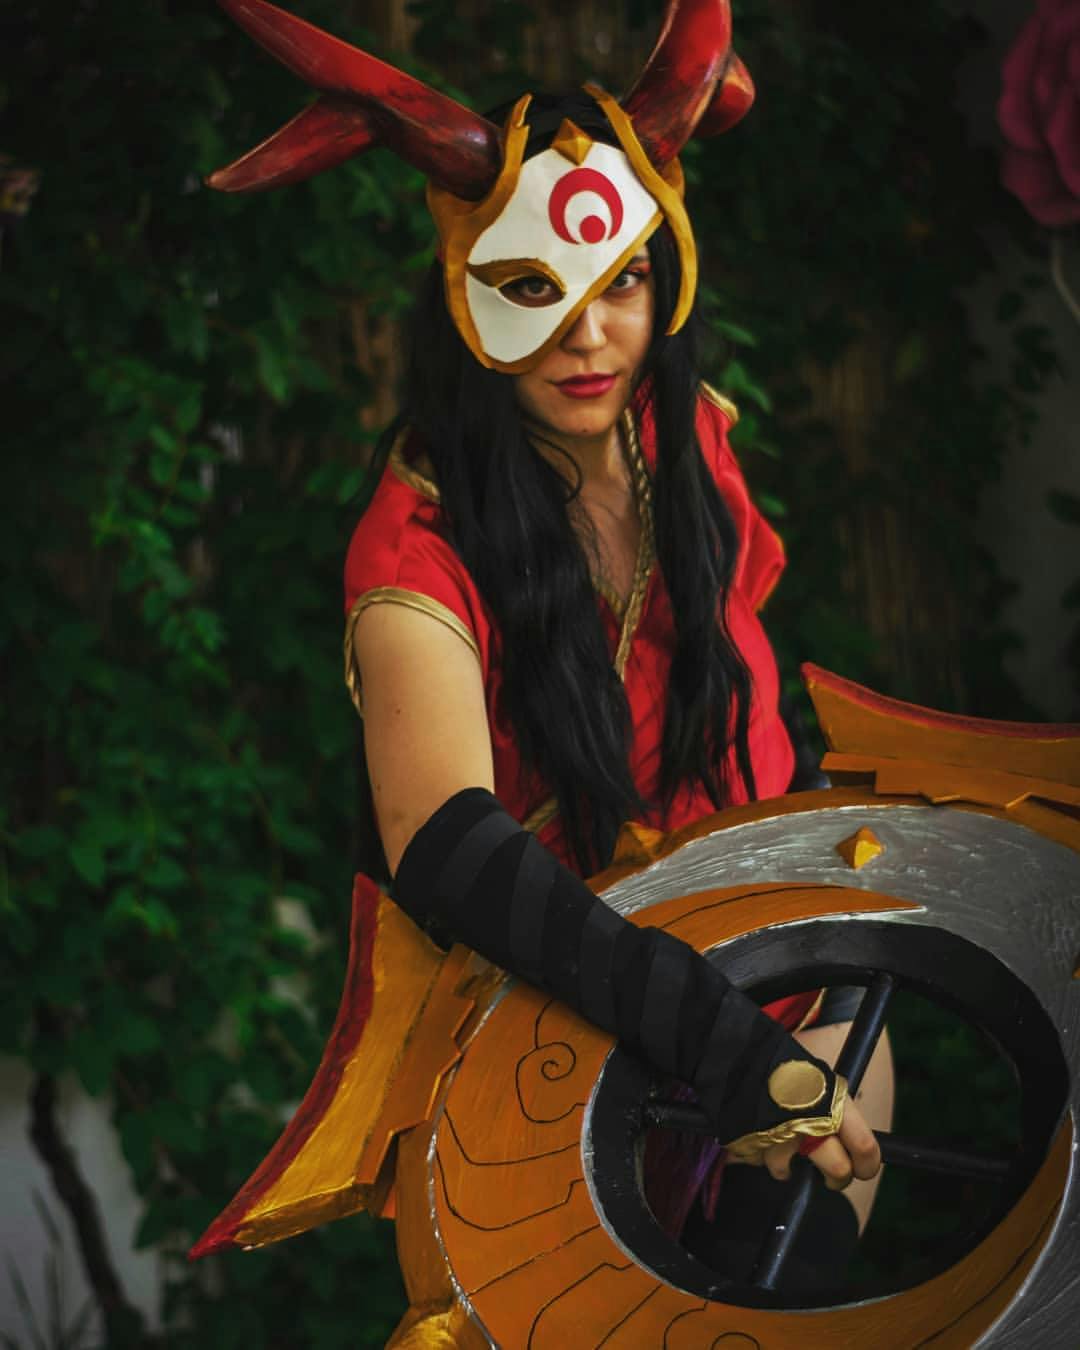 Merrlia Cosplay in her costume for Blood Moon Sivir from League of Legends.